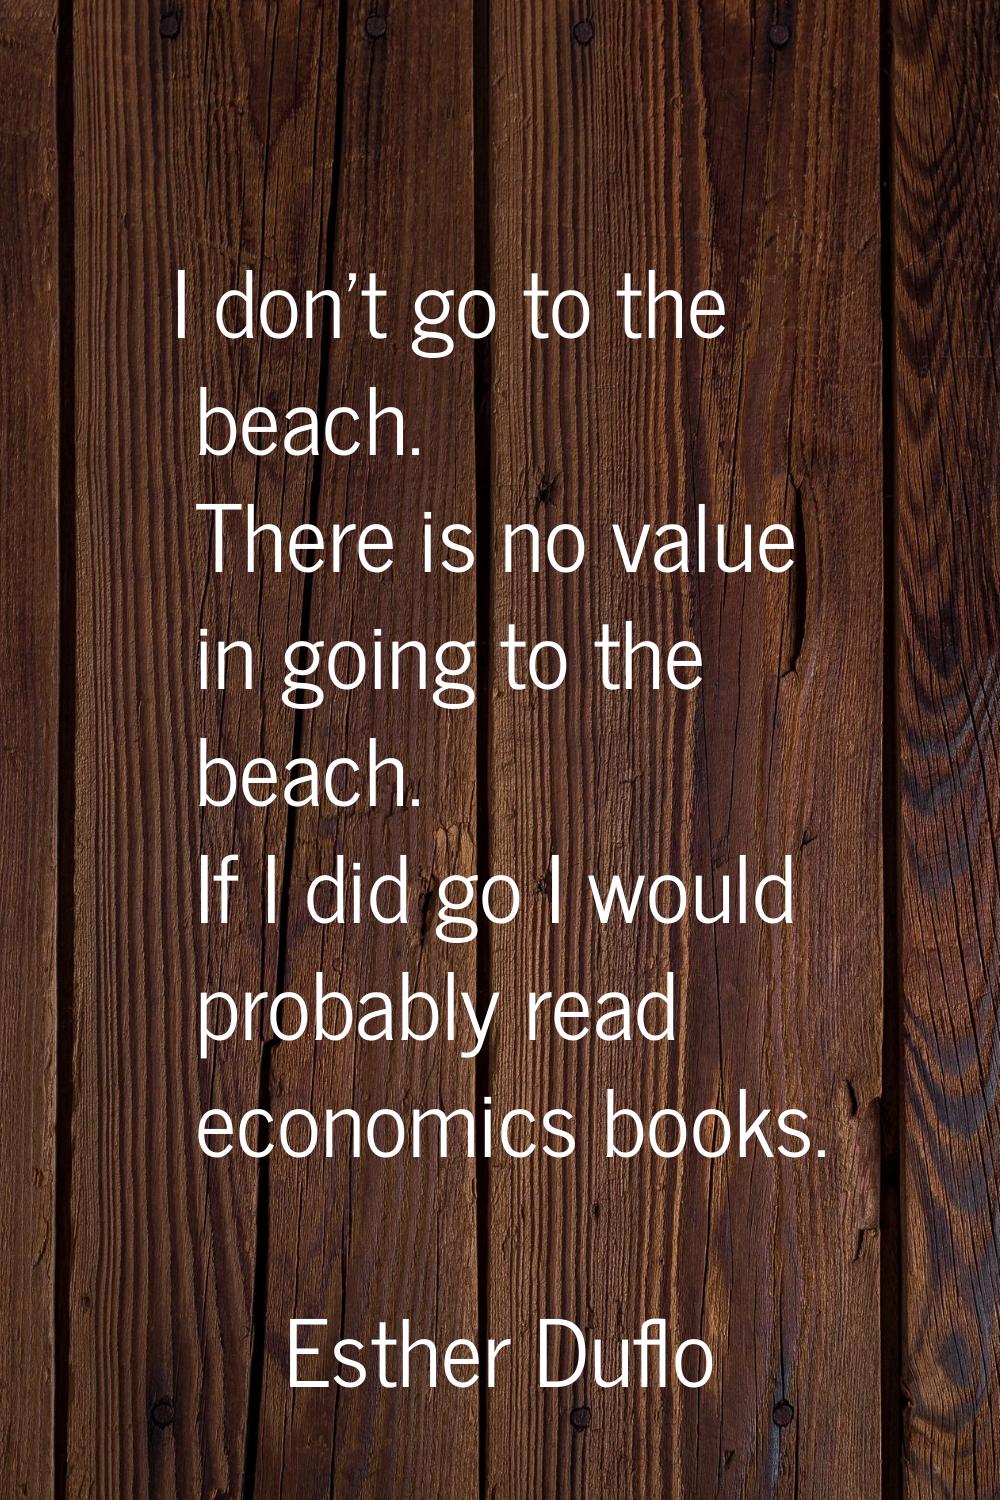 I don't go to the beach. There is no value in going to the beach. If I did go I would probably read